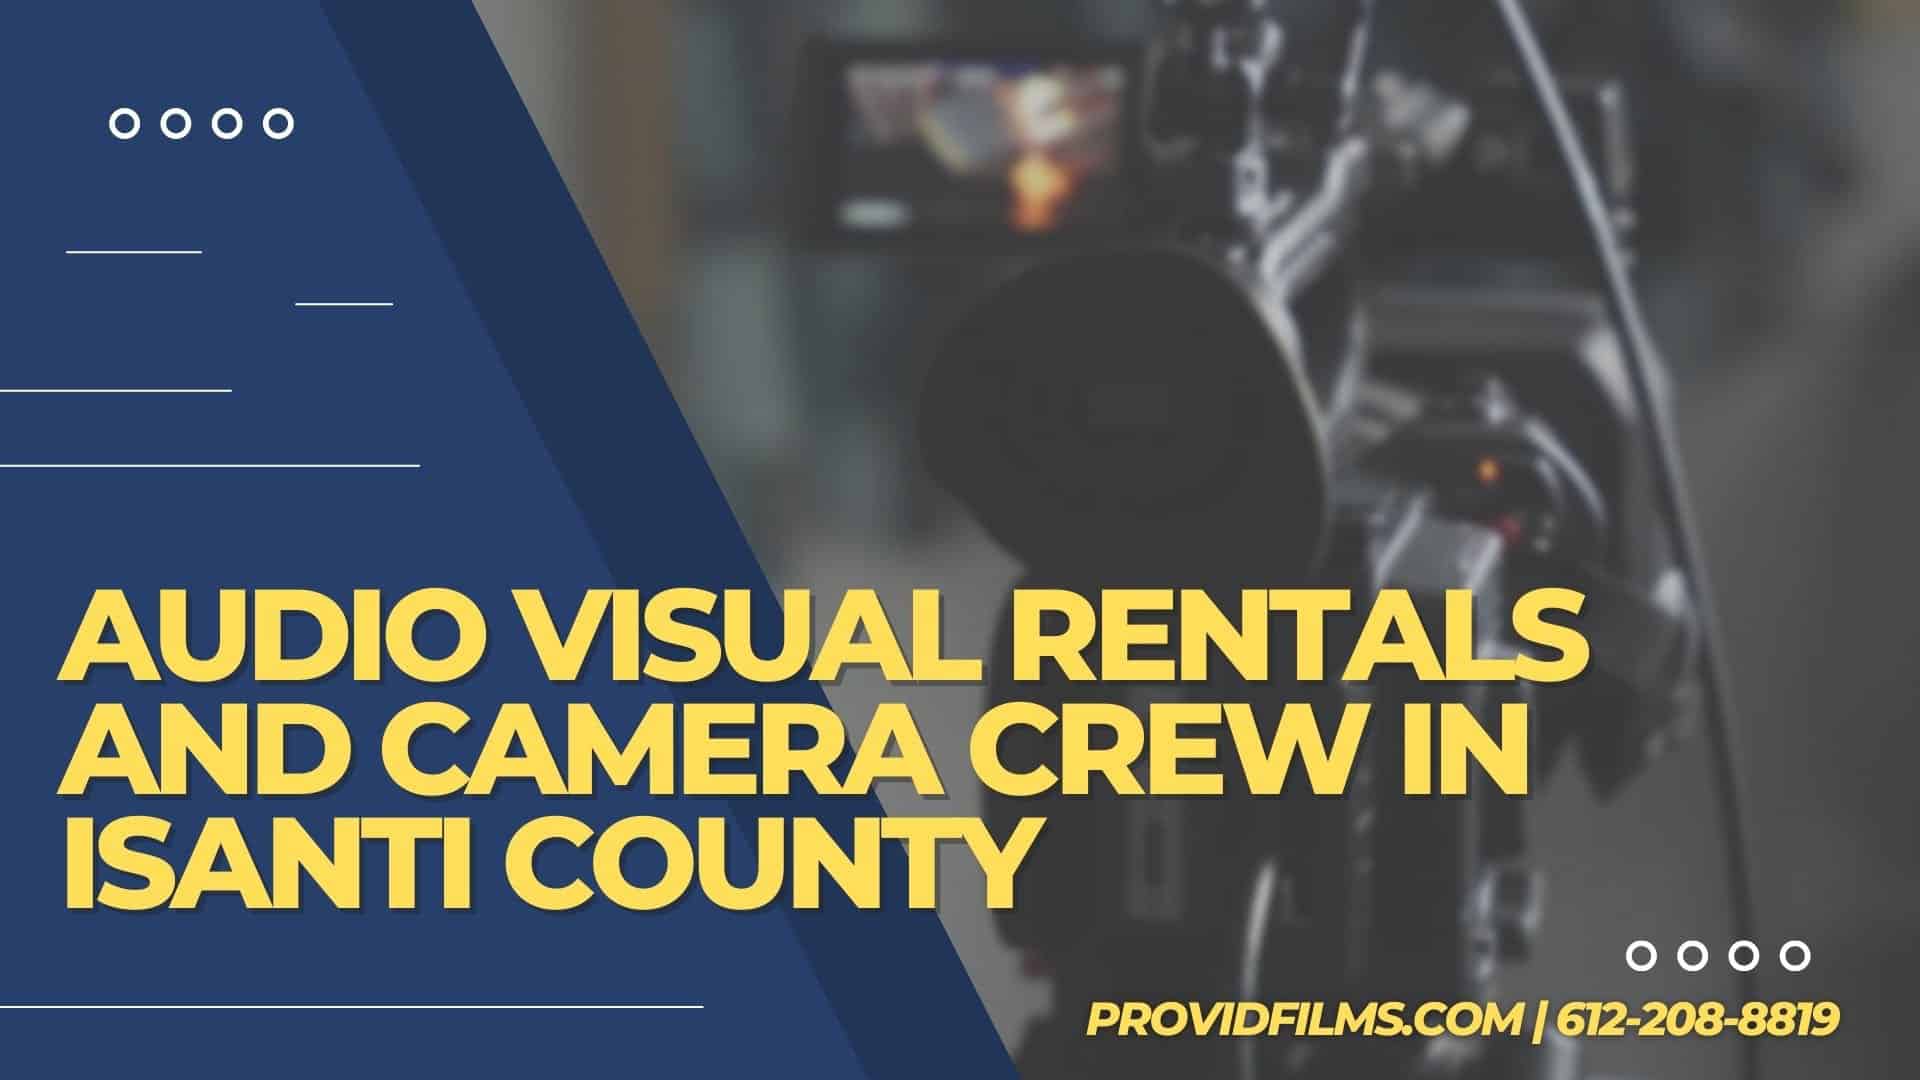 Graphic with a video camera crew with the text saying "AV Rental and Camera Crew in Isanti County"